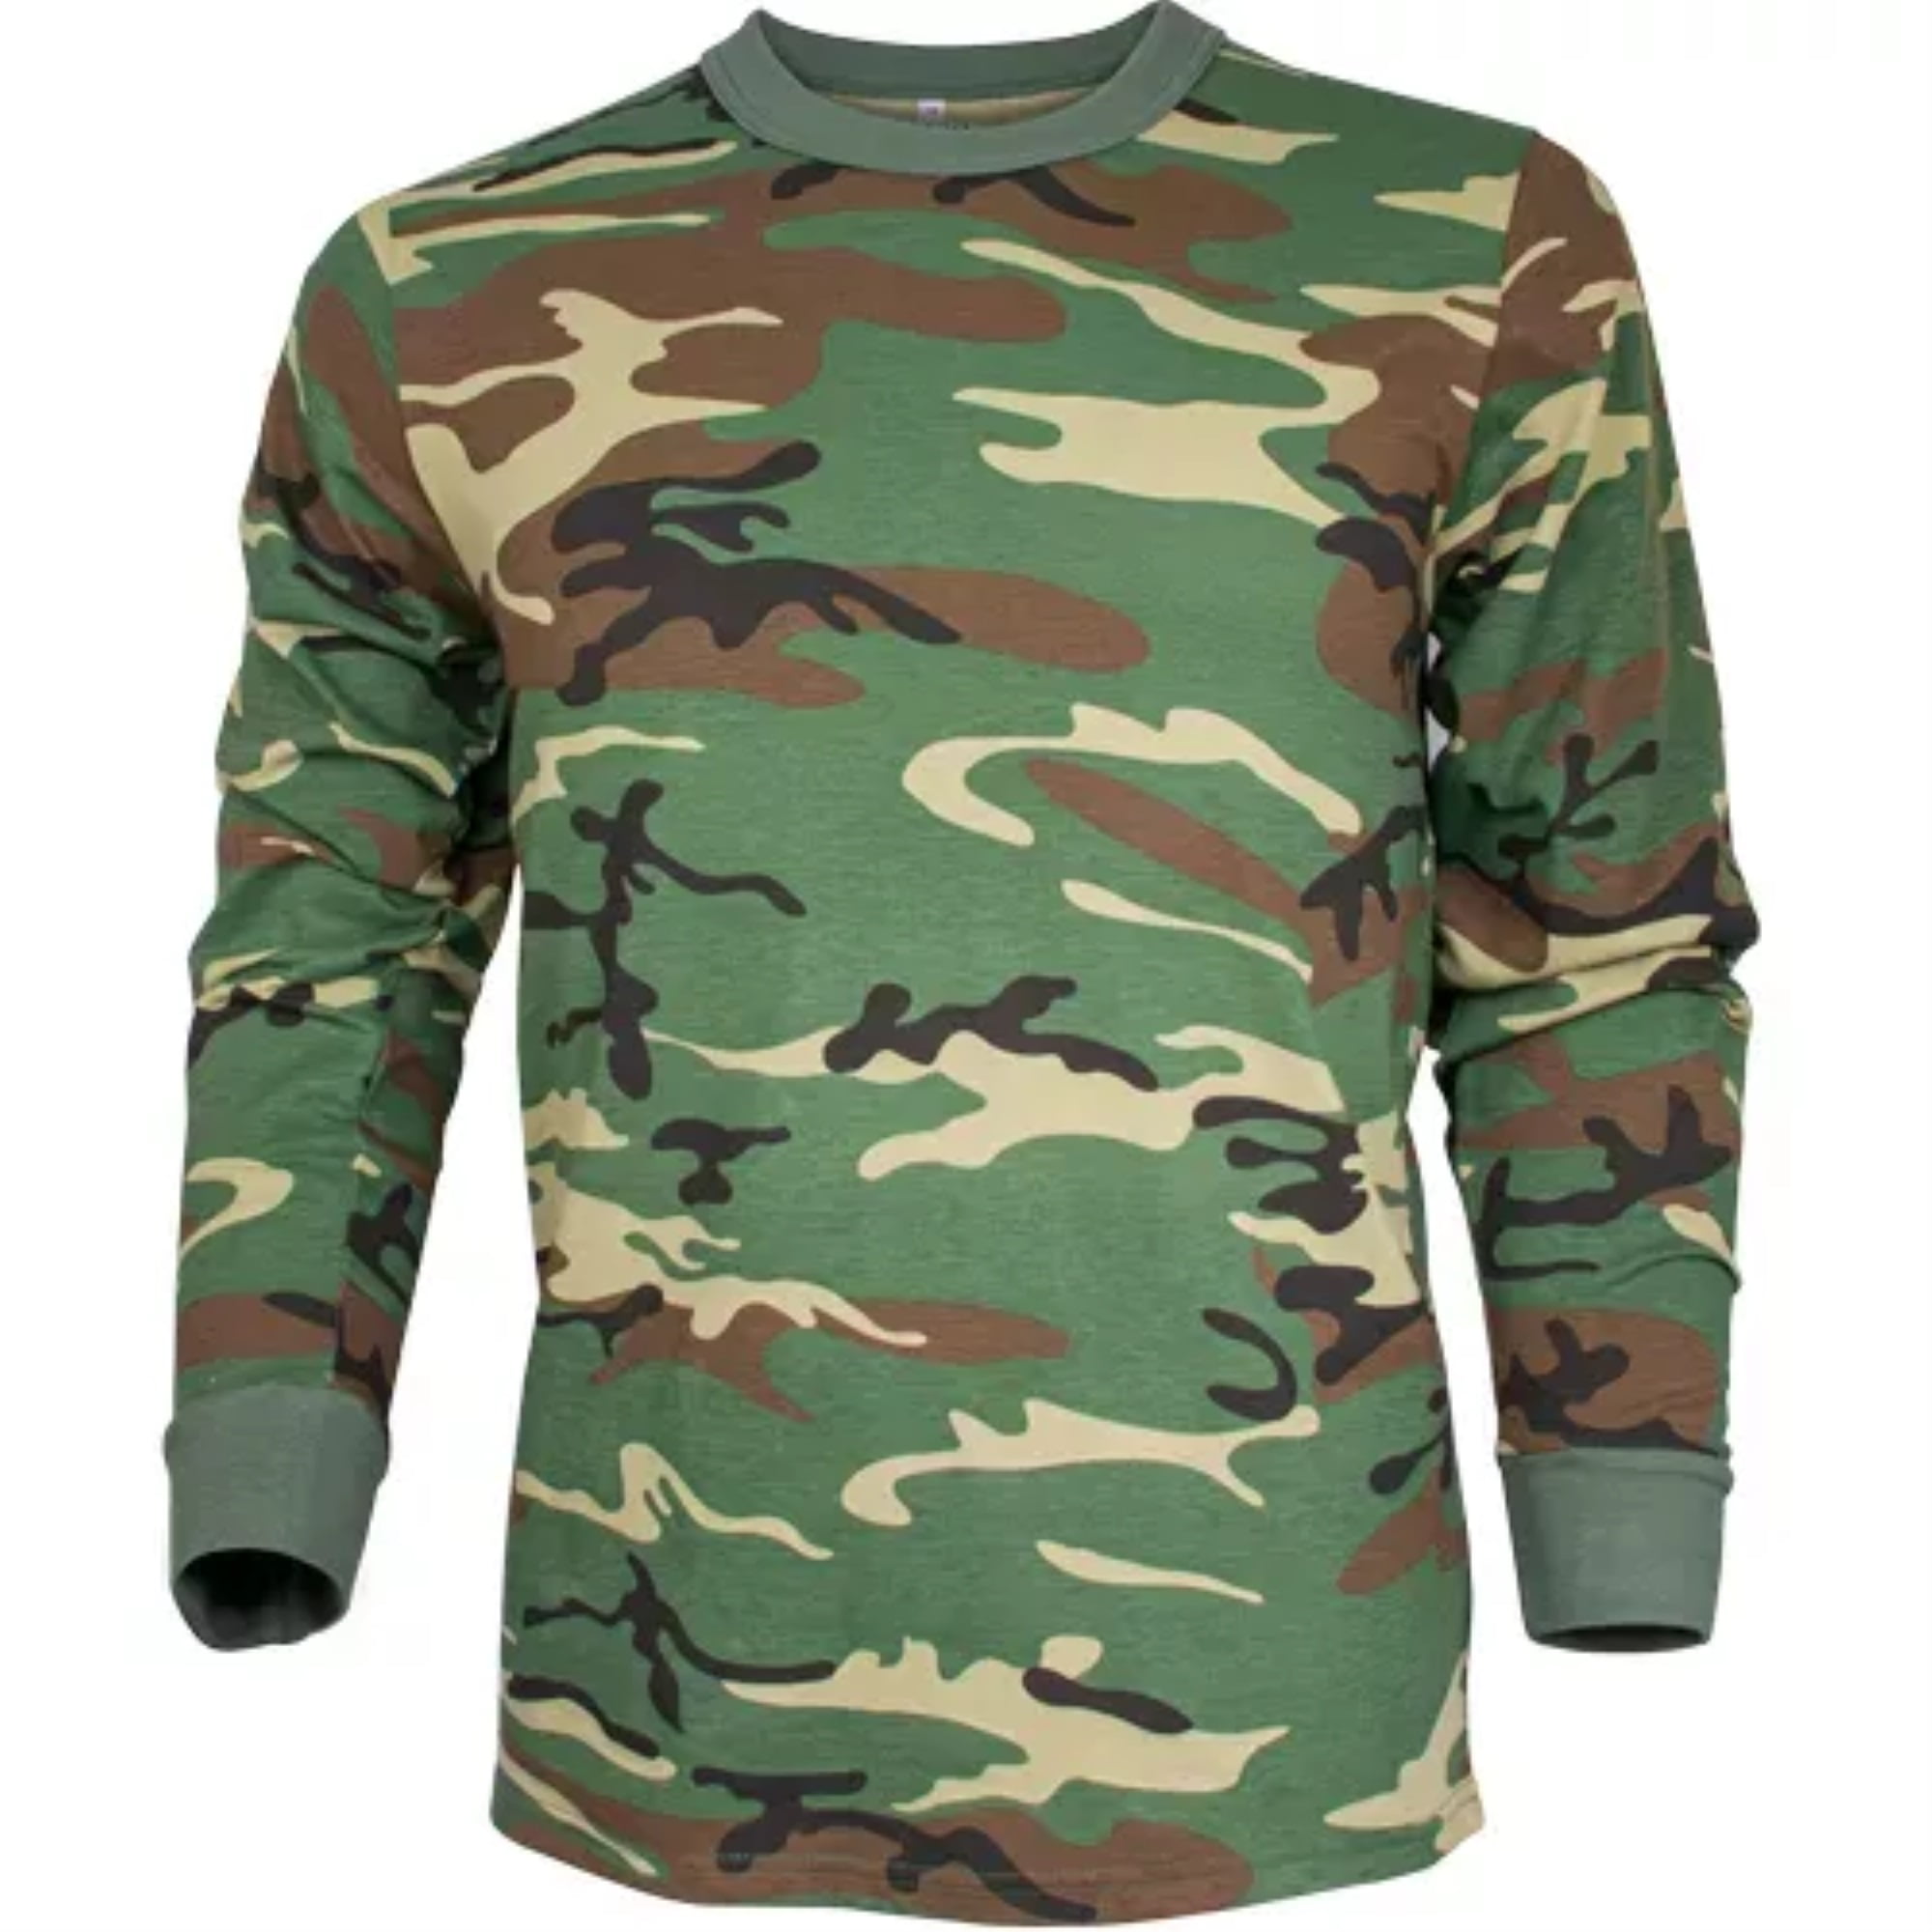 100% Cotton Army Military Top All Sizes New Woodland Camo Long Sleeved T-Shirt 